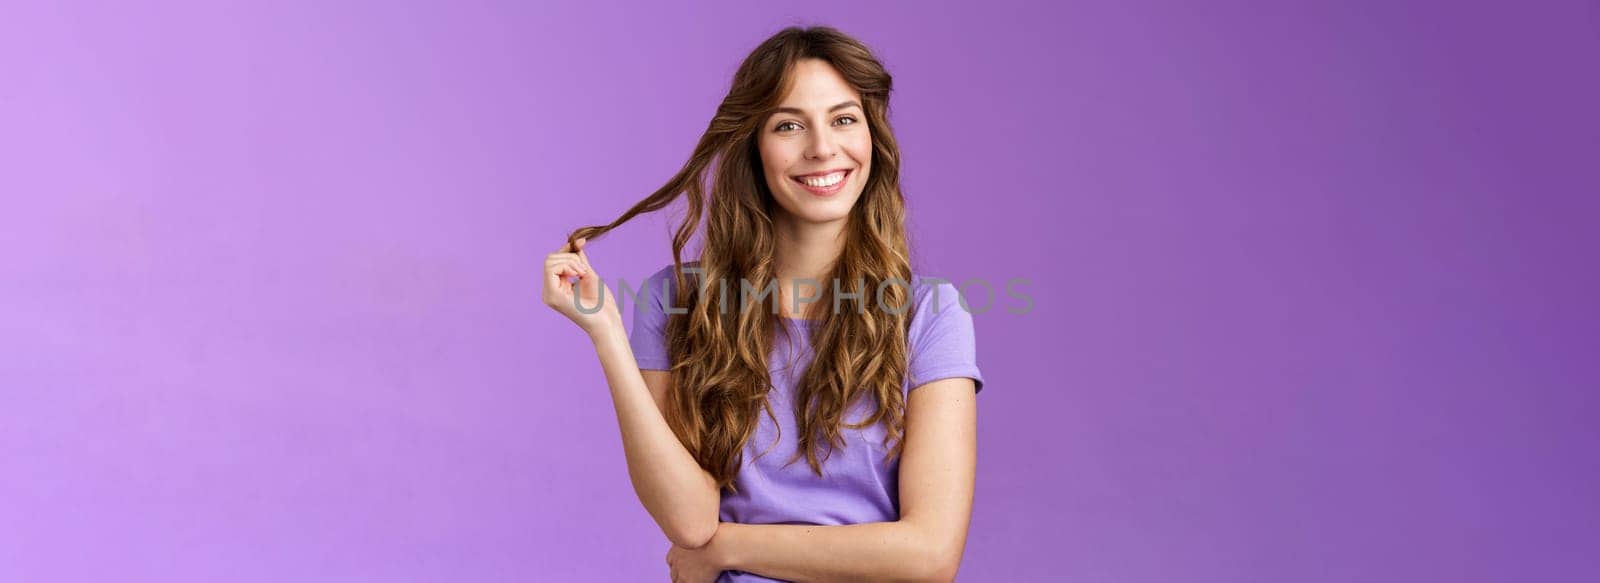 Tender confident good-looking outgoing curly-haired girl playing curl touch strand hair smiling enthusiastic hairstylist prepare good look evening date tilt head joyfully grinning cross arm chest. Lifestyle.